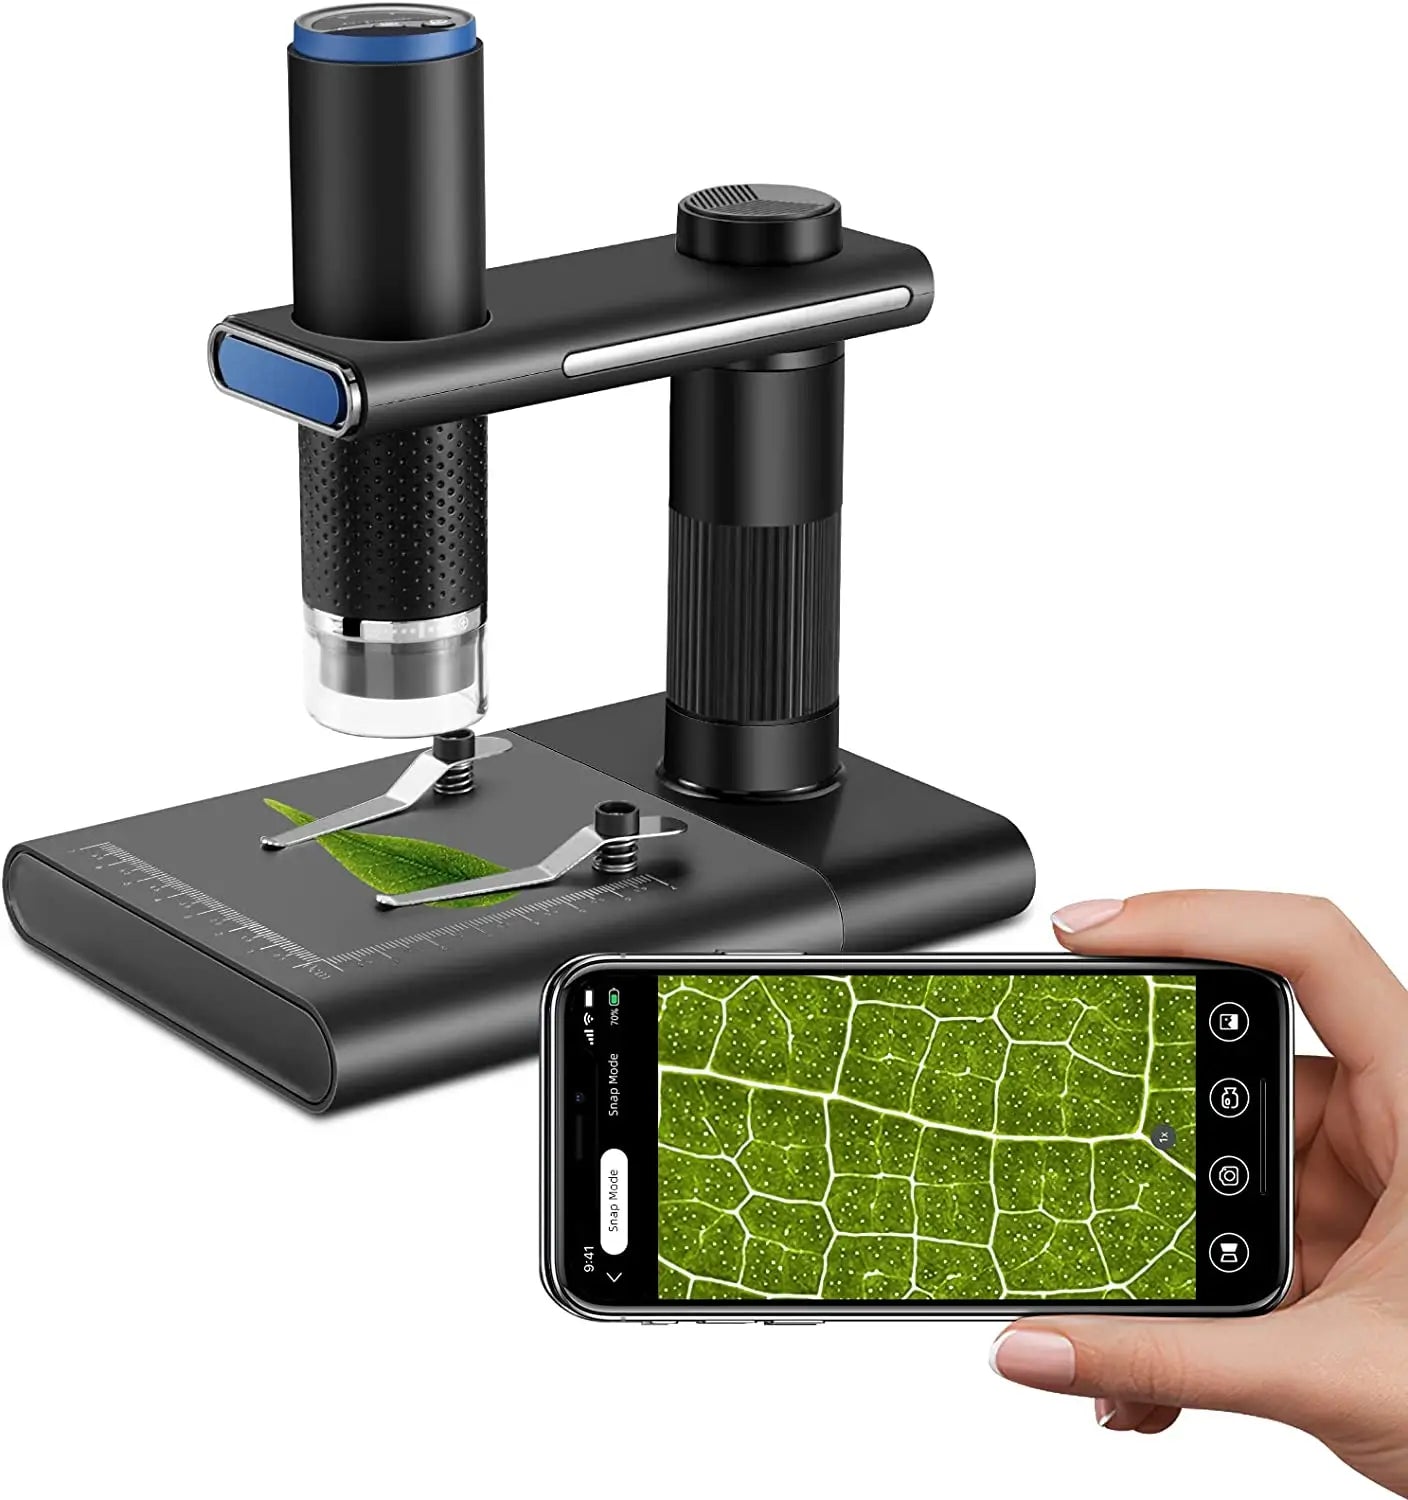 WiFi Camera Microscope for Phone 50-1000x Portable Handheld USB Digital Microscope with Adjustable Stand For iPhone Android iPad